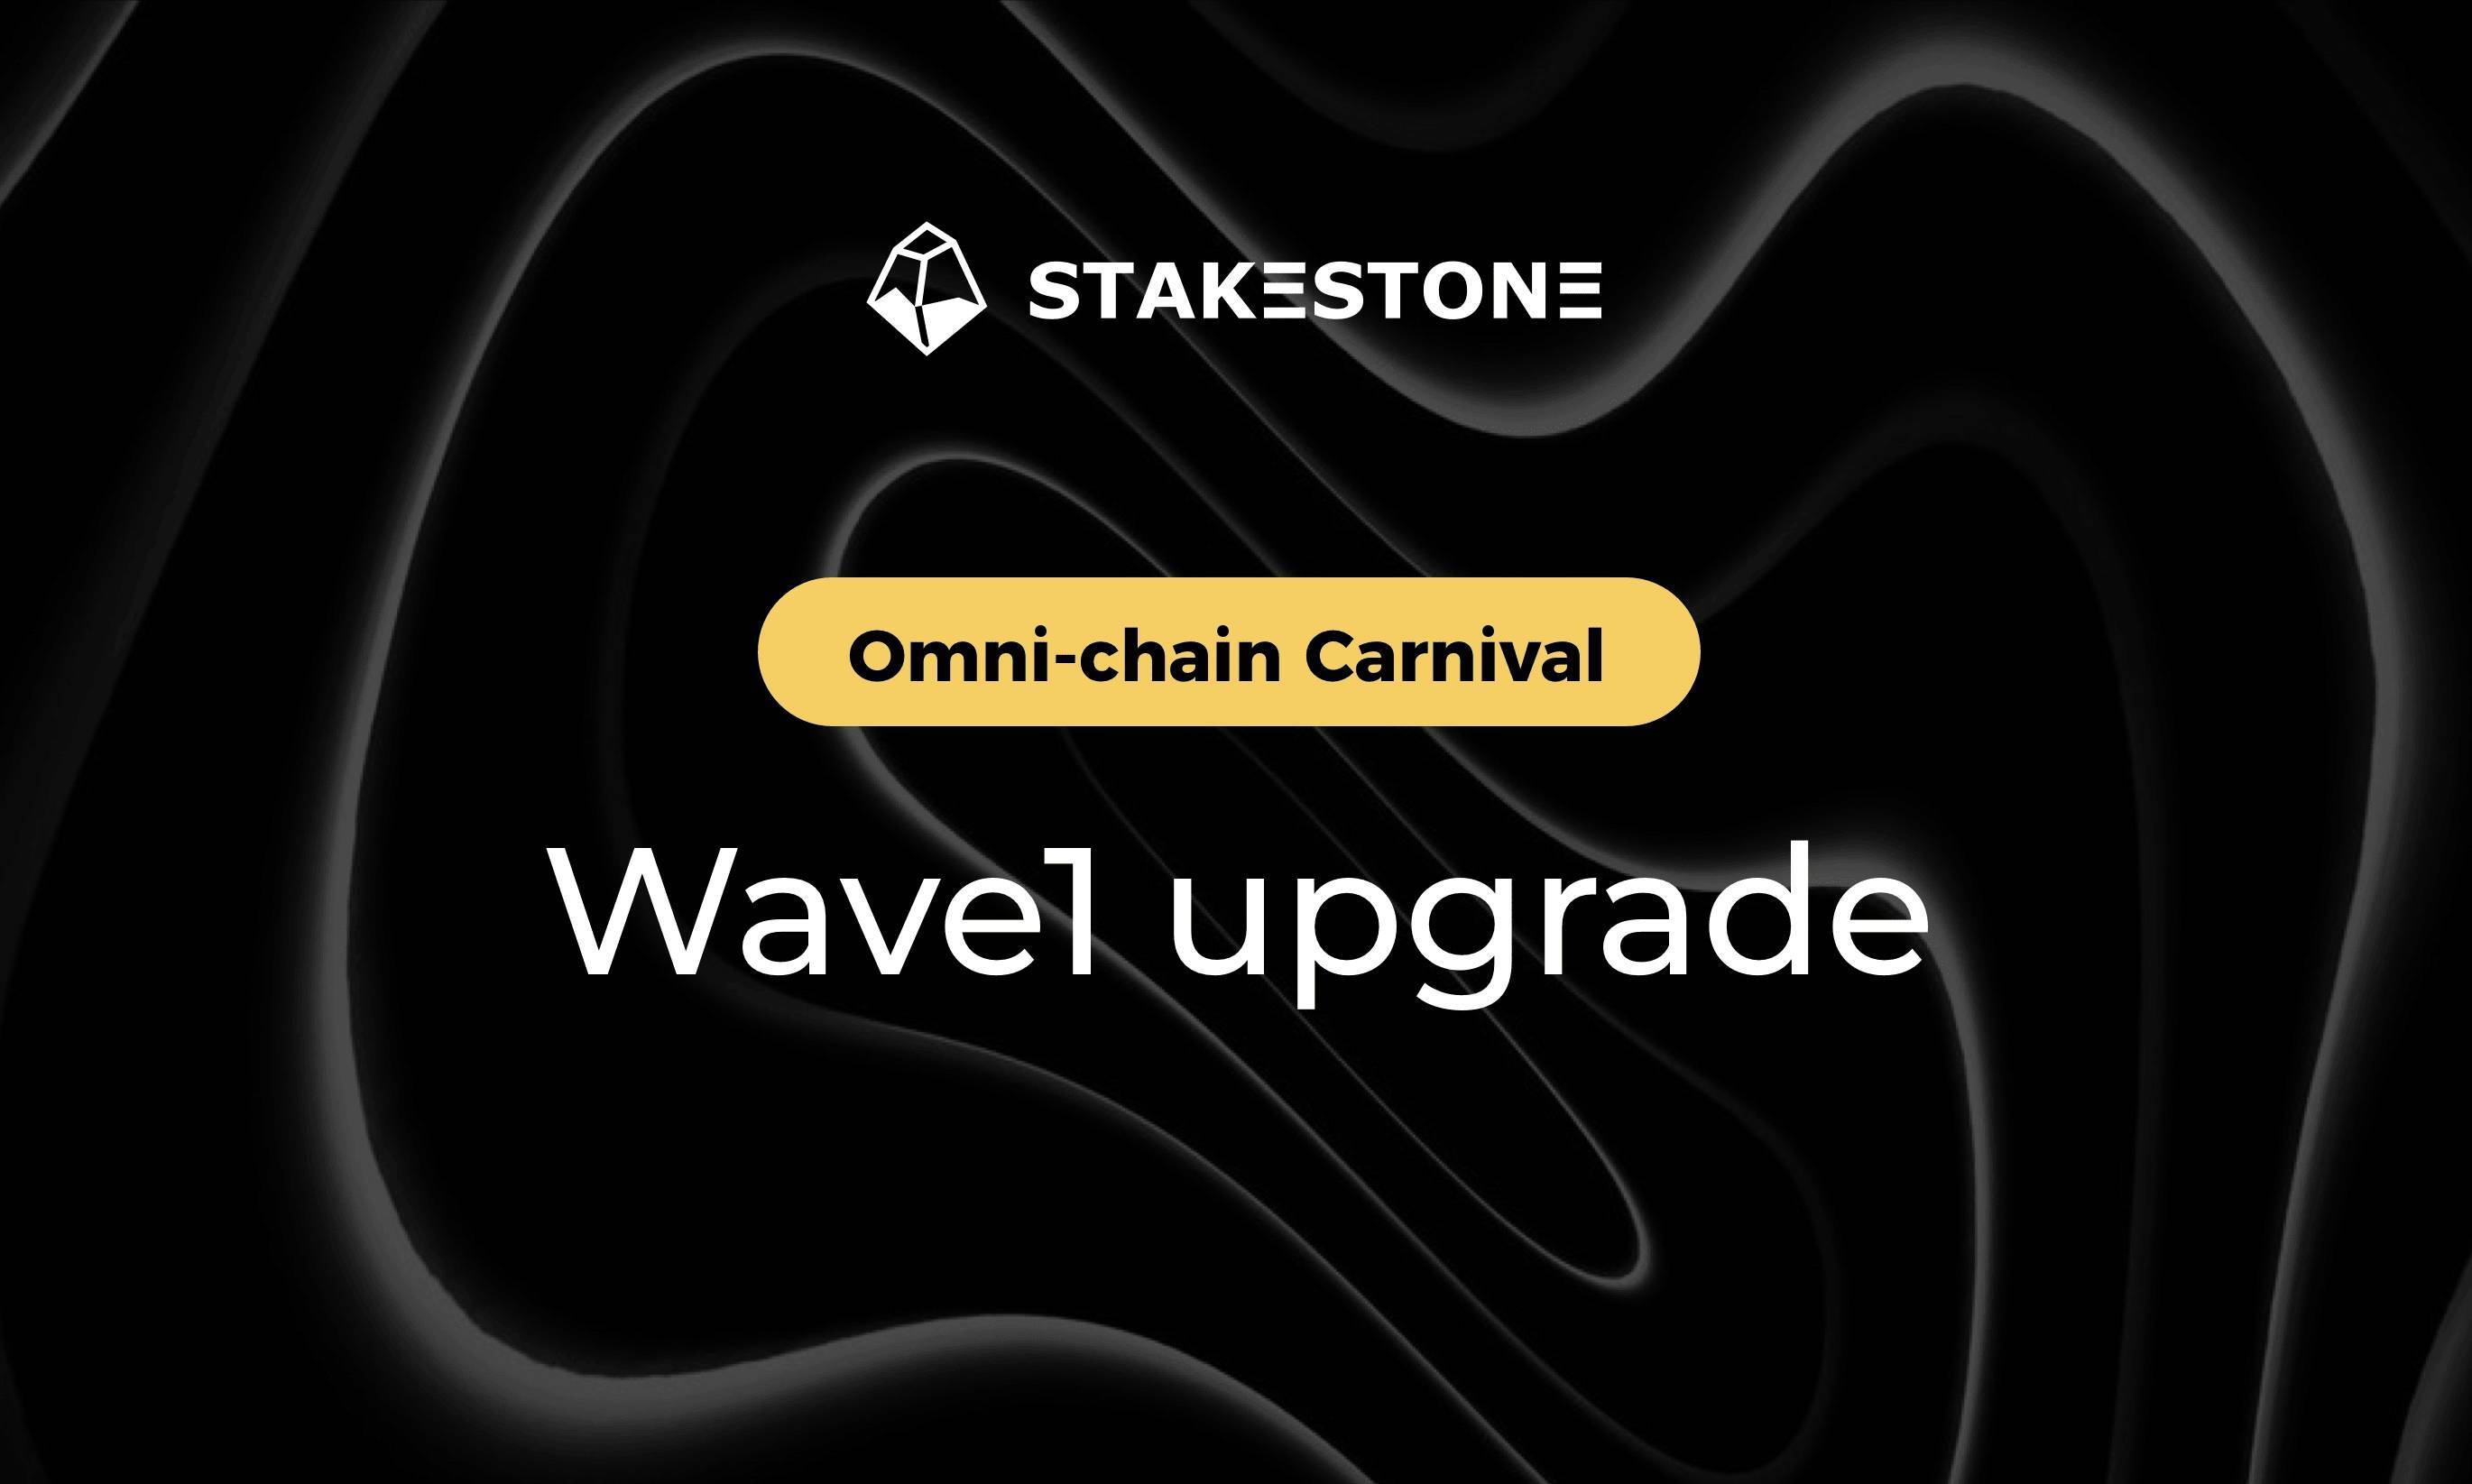 Stakestone Khởi Chạy Chiến Dịch Omnichain Carnival Wave 1